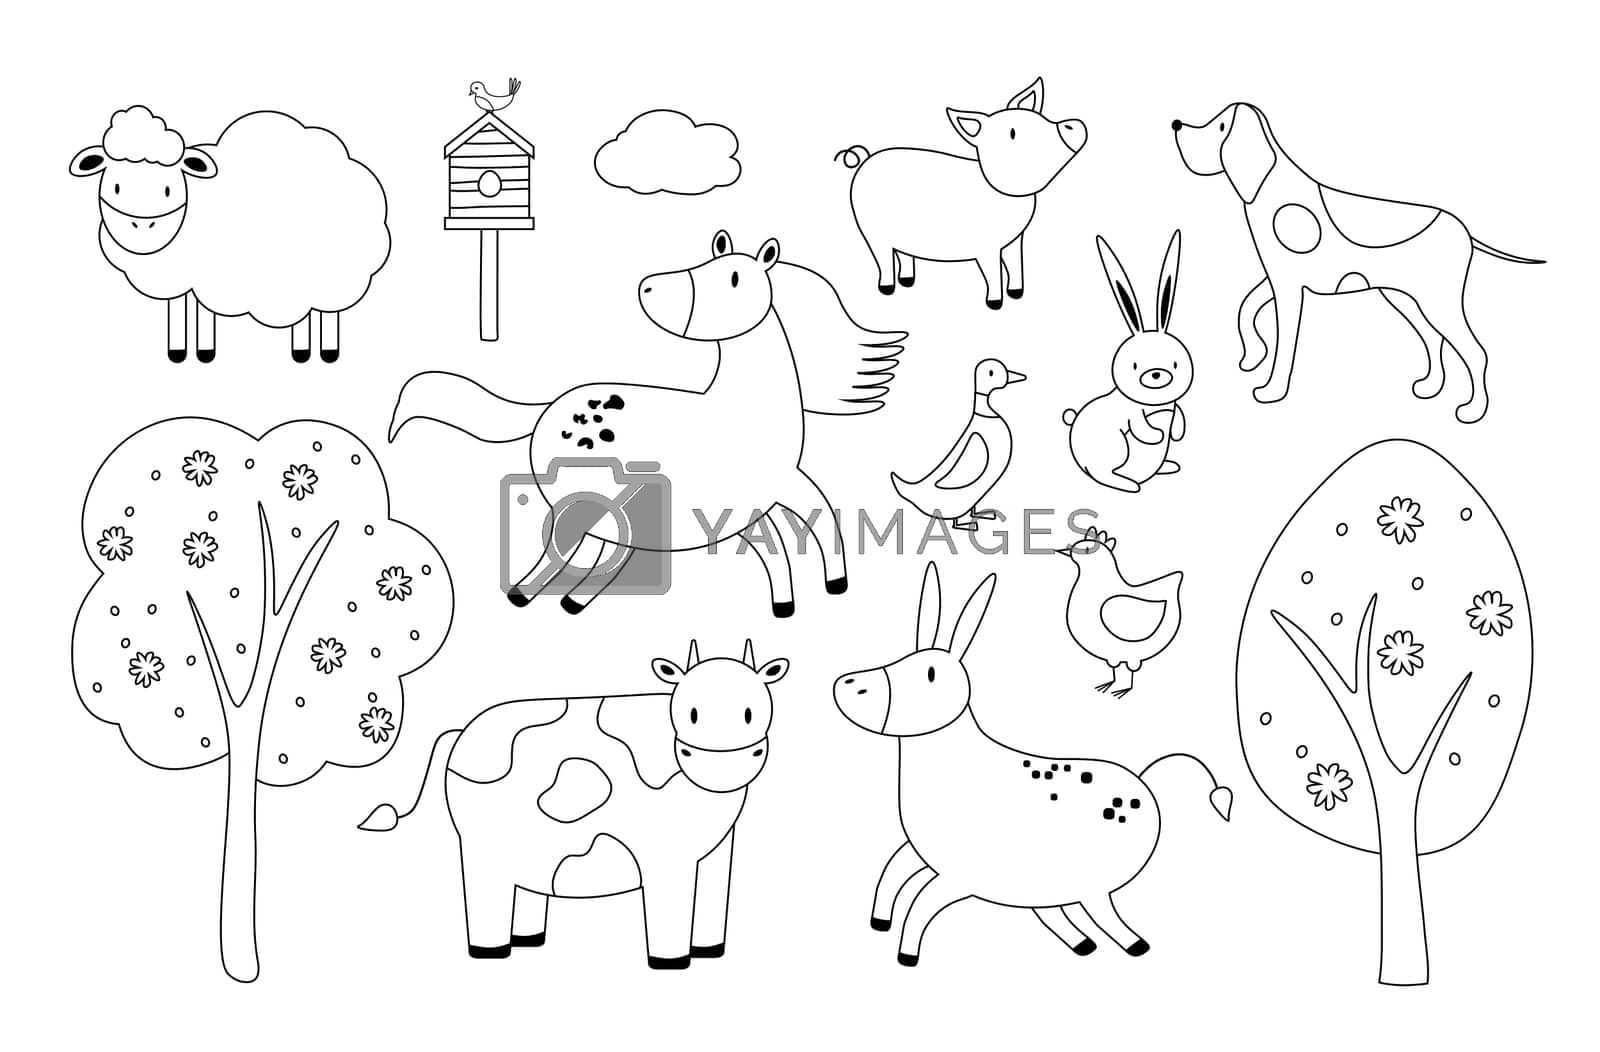 Royalty free image of Set of domestic and farm animals and pets and trees. Thin black line art icons. Linear cartoon style illustrations isolated on white. EPS by Alxyzt